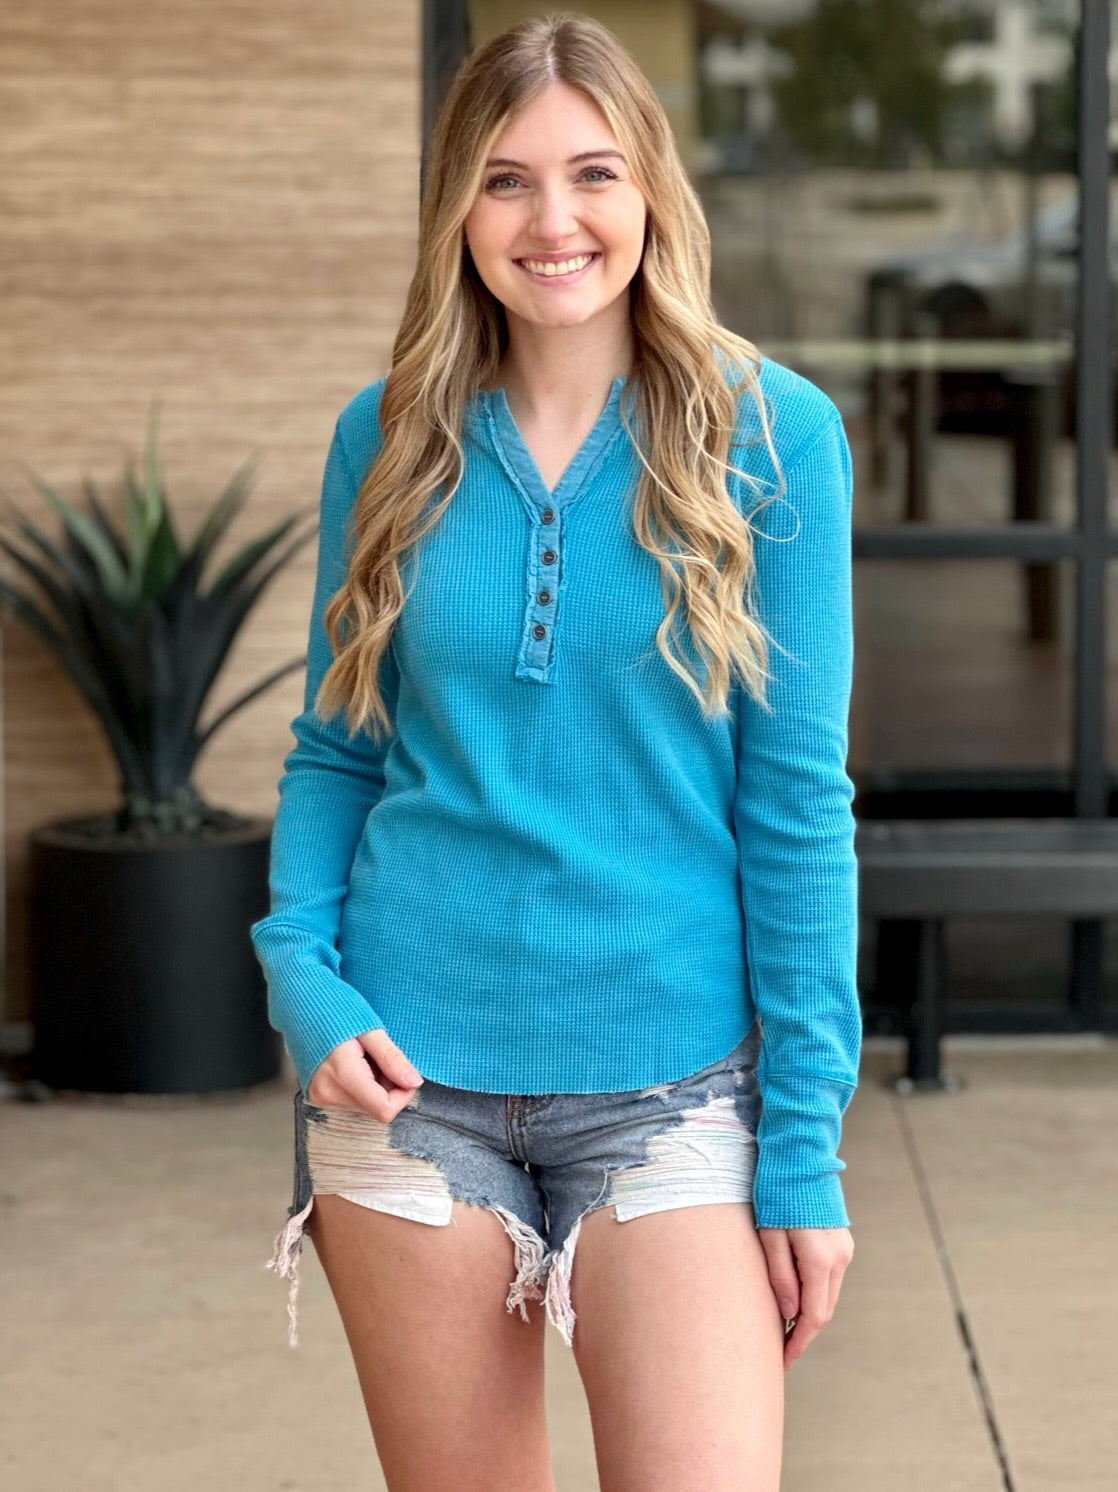 Lexi in turquoise henley front view smiling